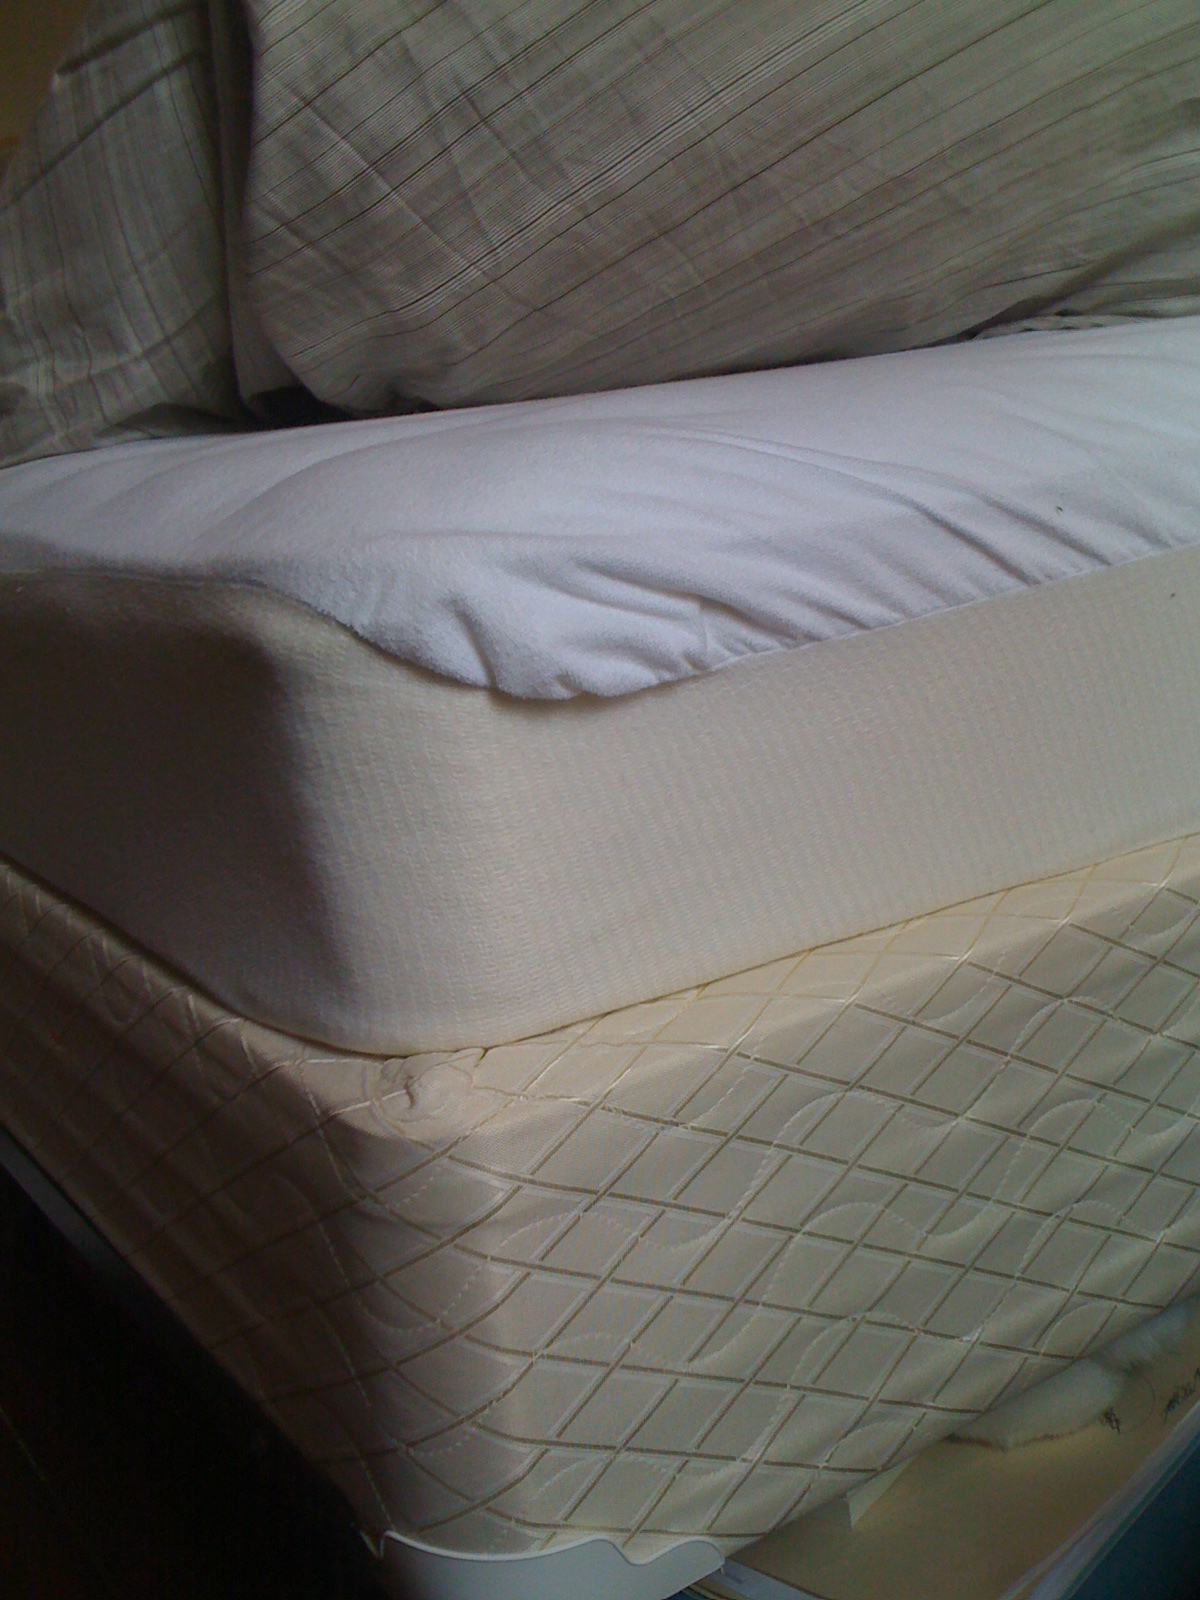 Ditmas Park Listings: Full size mattress, box spring & bed frame - $100